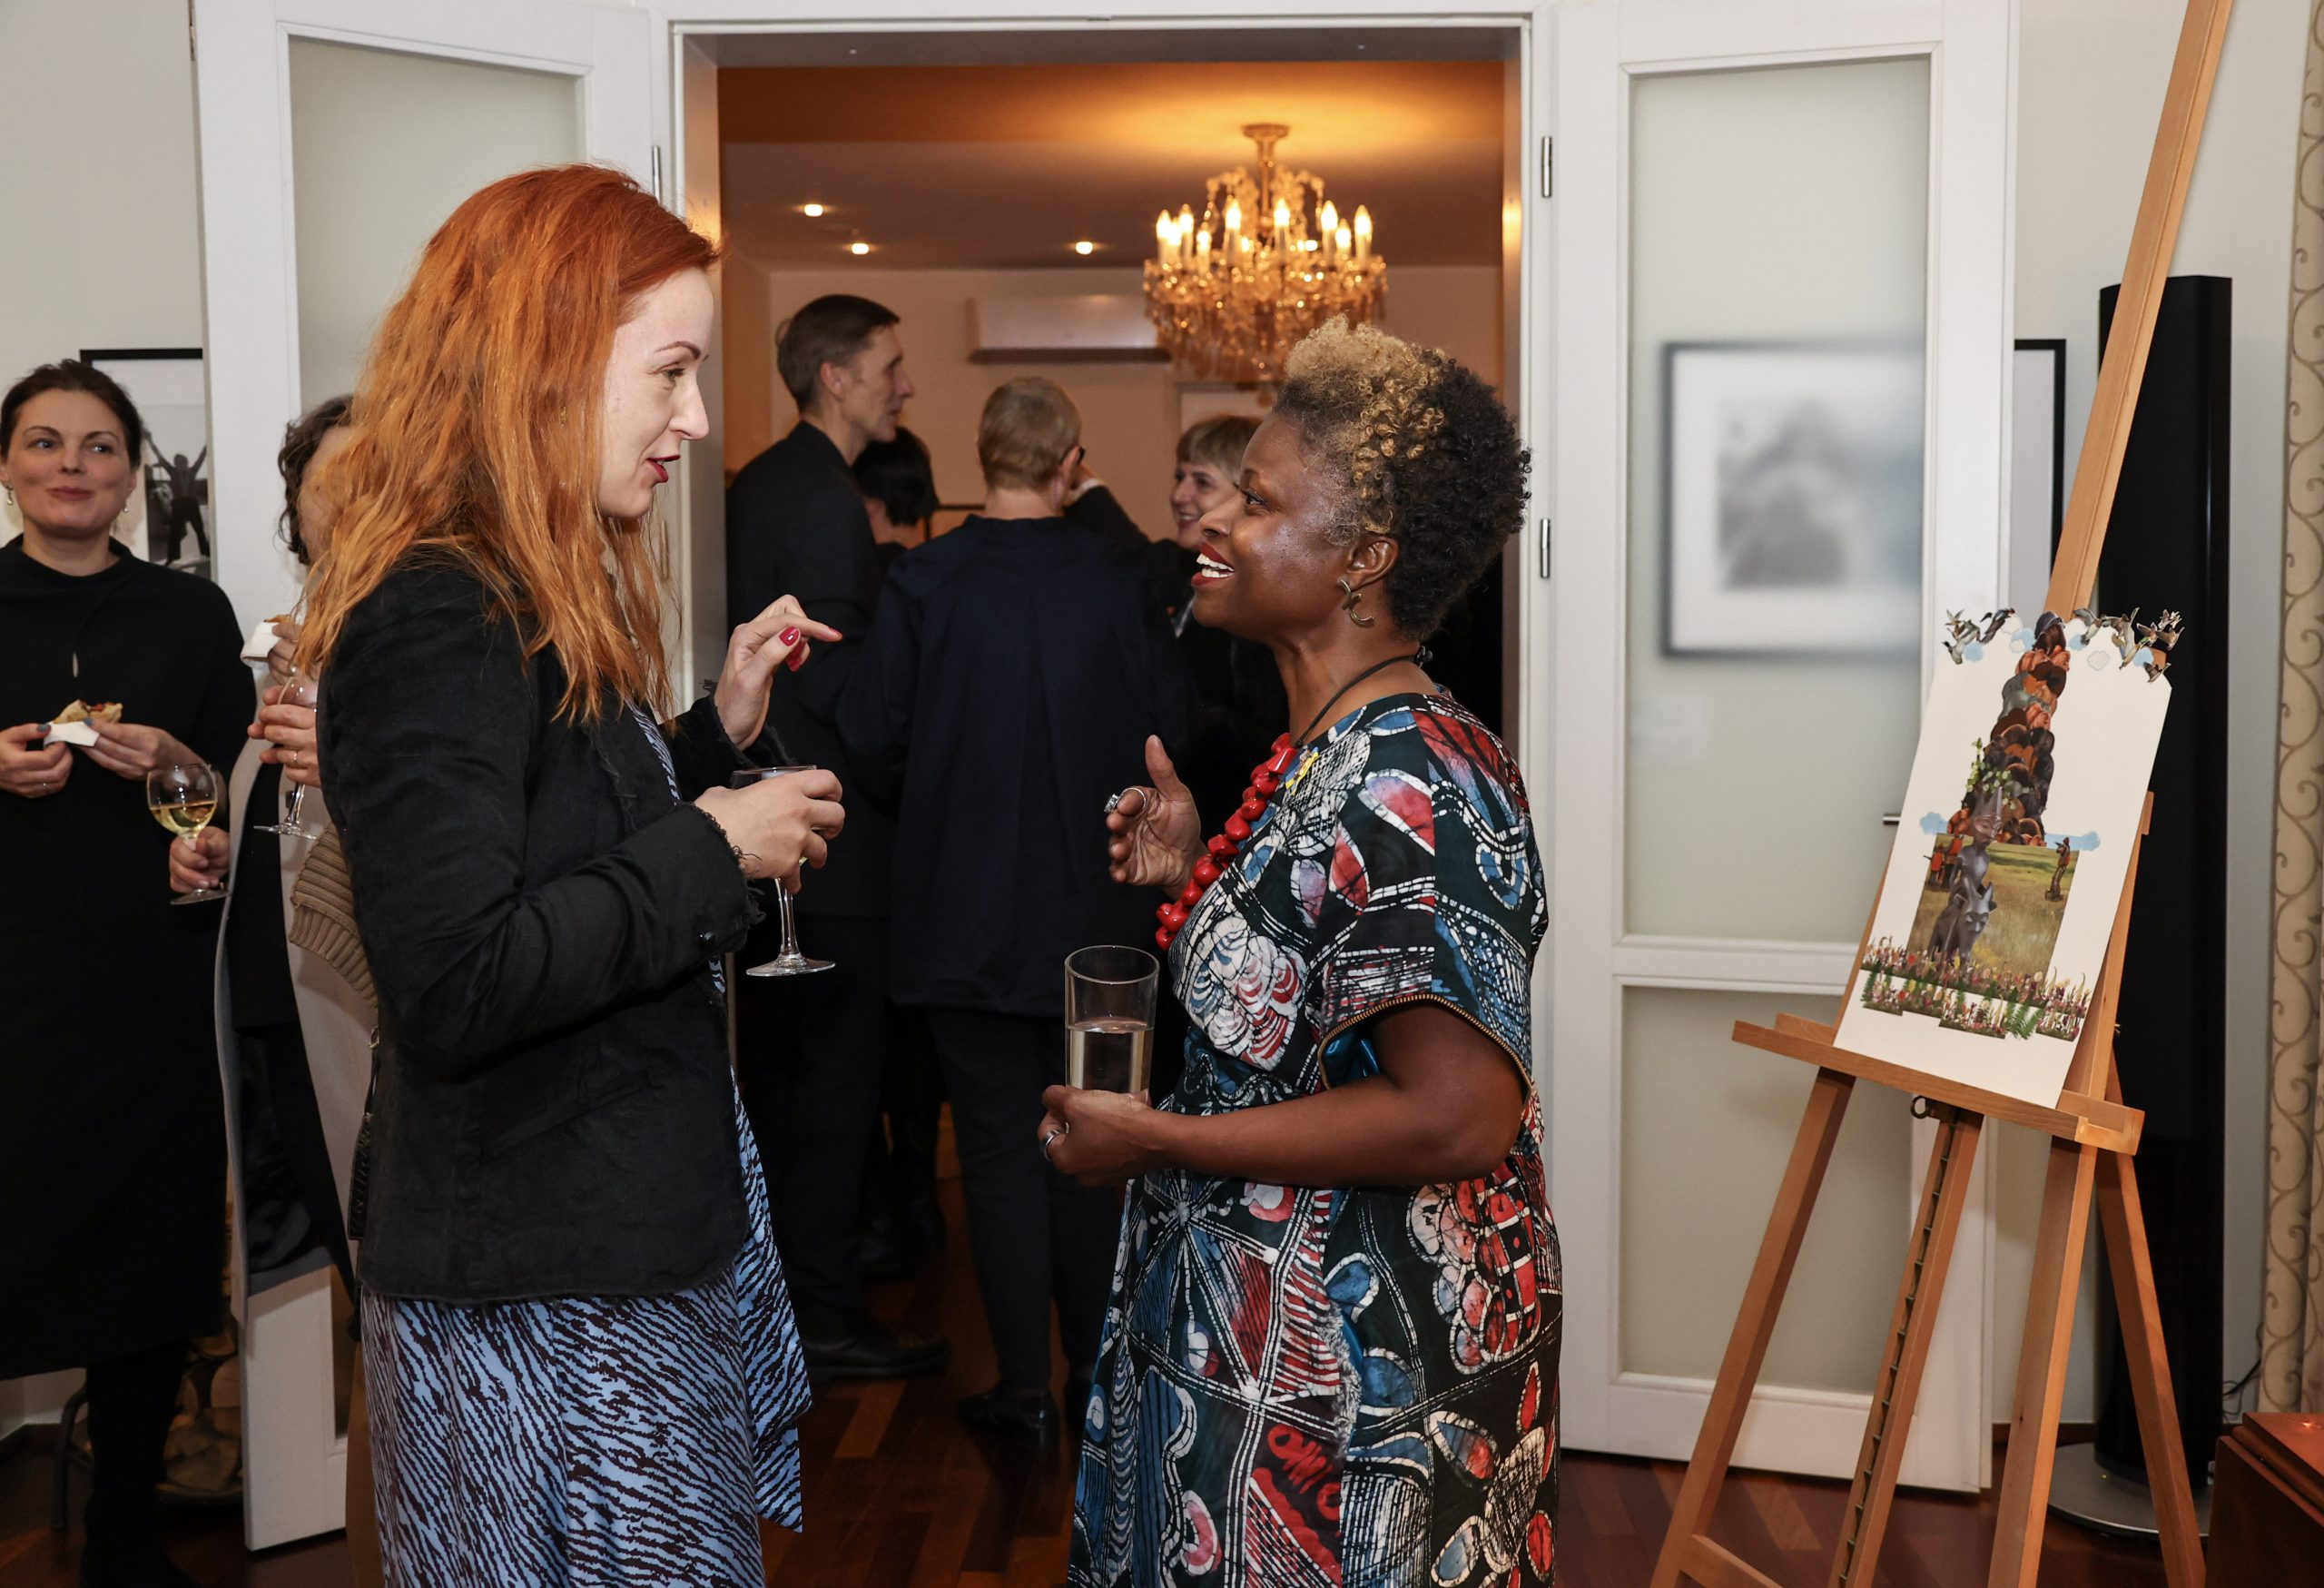 At the reception, Charlton engaged directly with luminaries of the Lithuanian art world, cultural program managers, art critics, and multiple generations of Lithuanian artists.